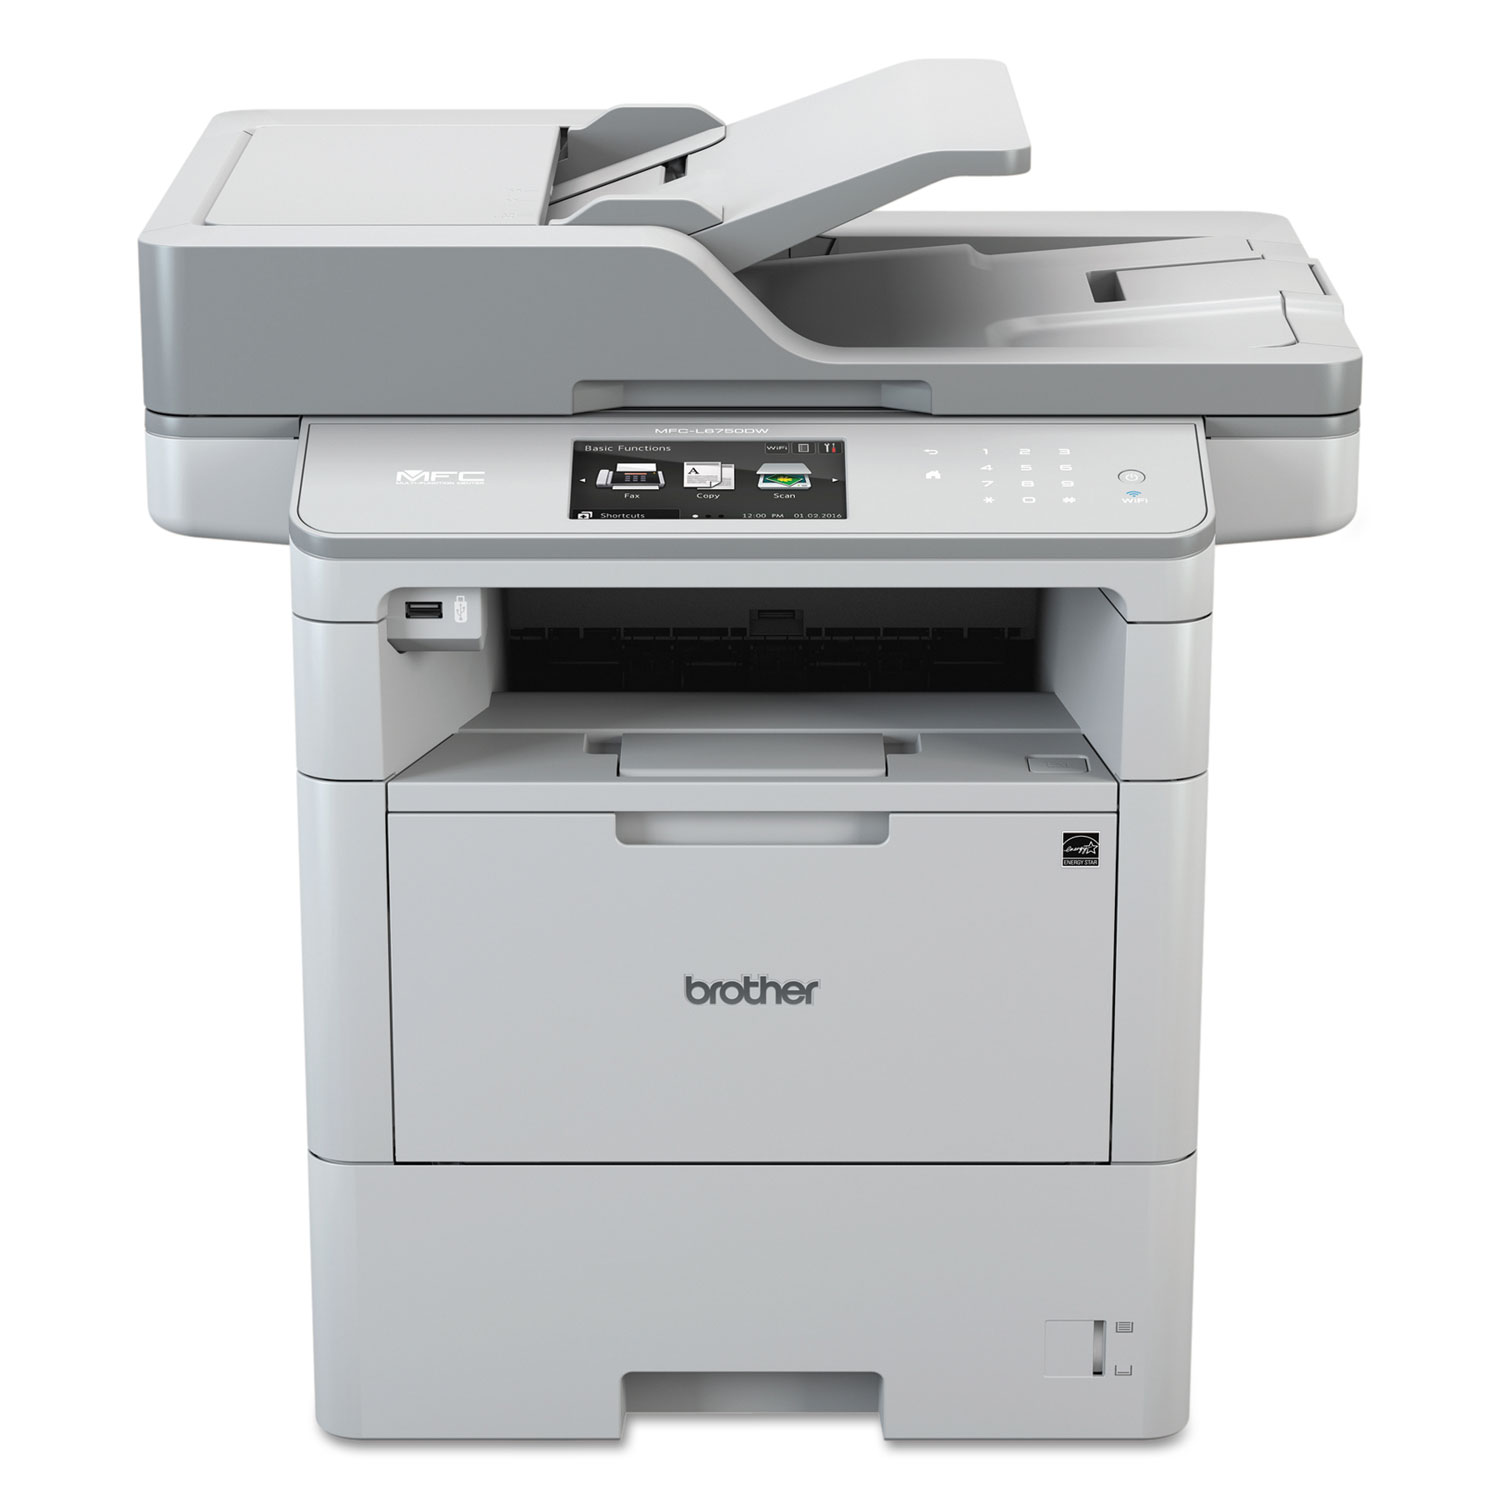  Brother MFCL6750DW MFCL6750DW Business Laser All-in-One with Advanced Duplex, Wireless Networking and Large Paper Capacity (BRTMFCL6750DW) 